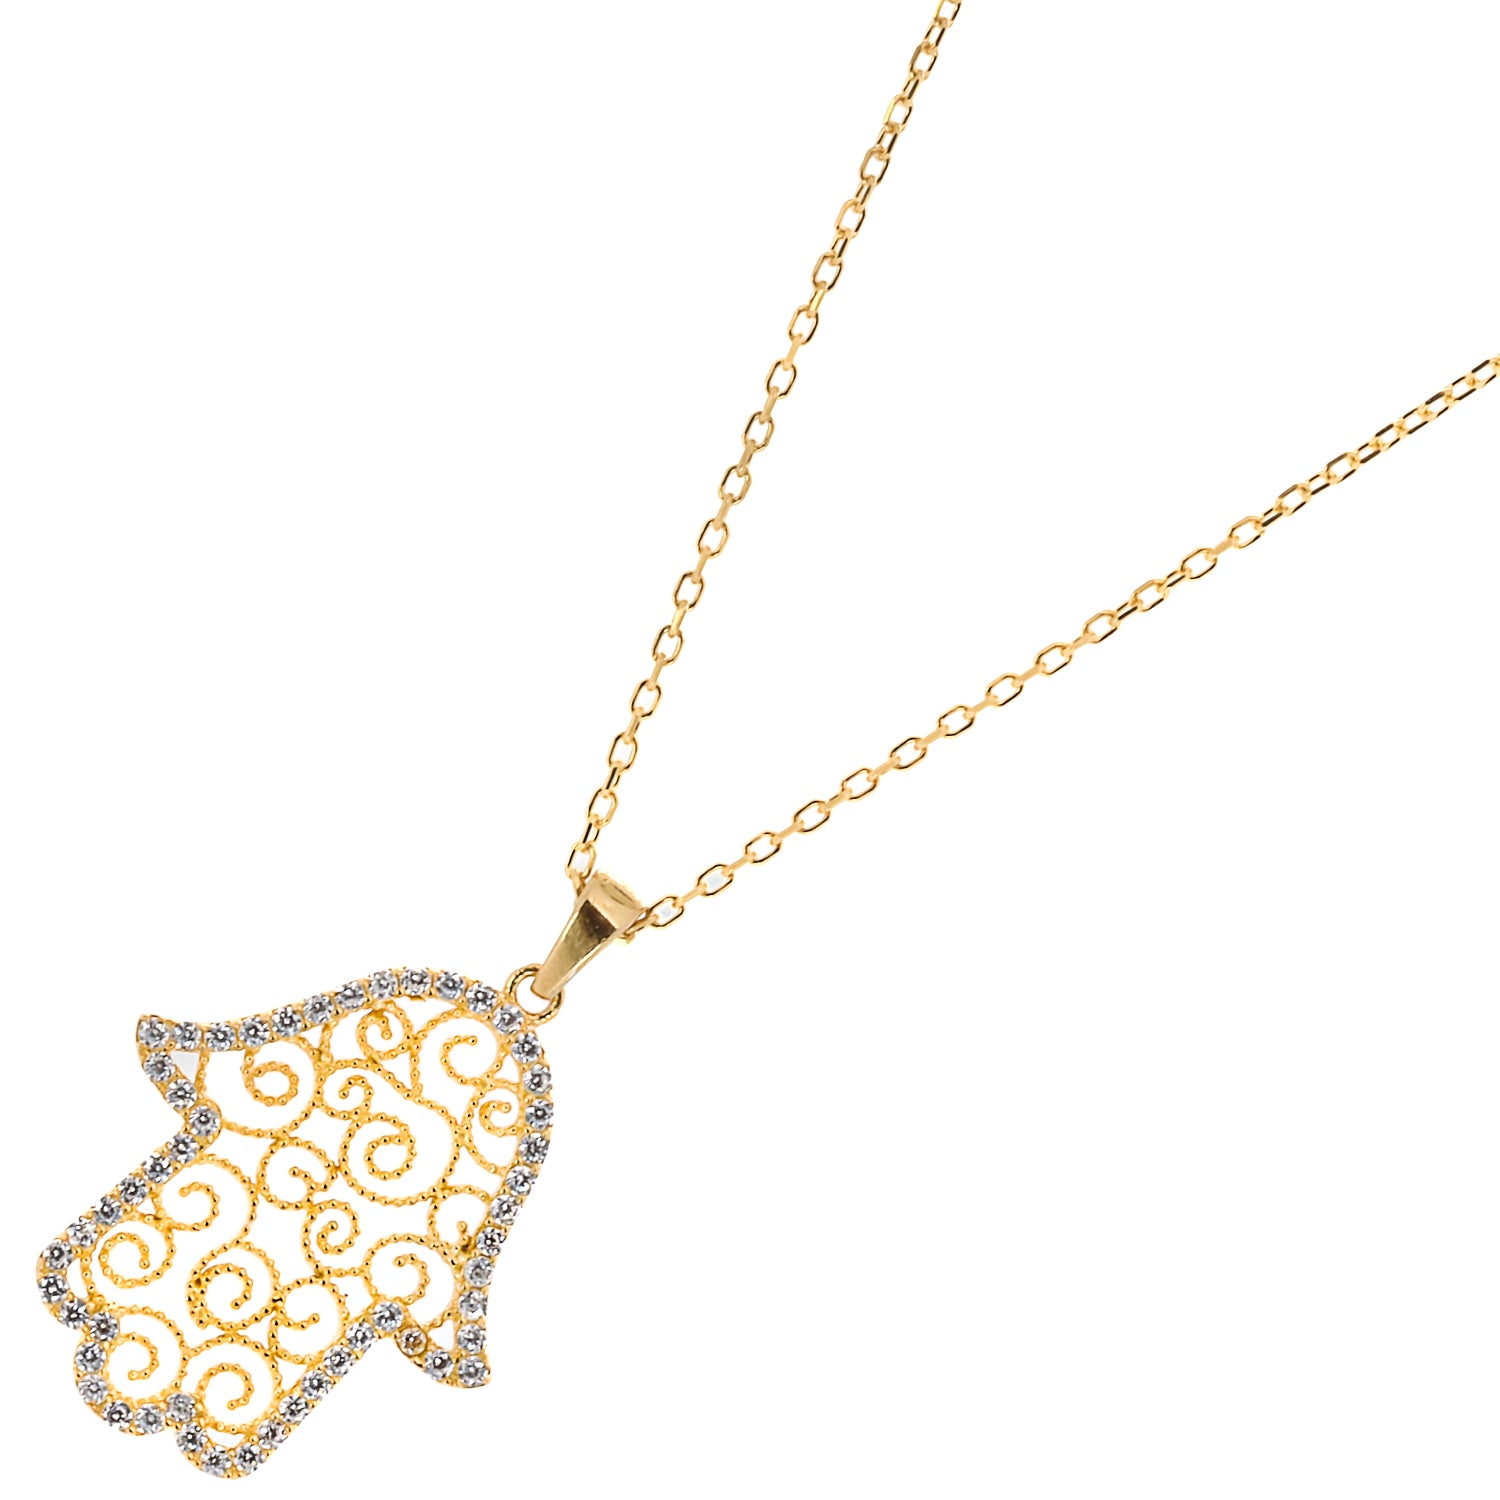 Detailed shot of the sparkling CZ diamonds on the Hamsa pendant of the Gold Spiral Hamsa Necklace, adding an elegant and luxurious touch to the overall design.